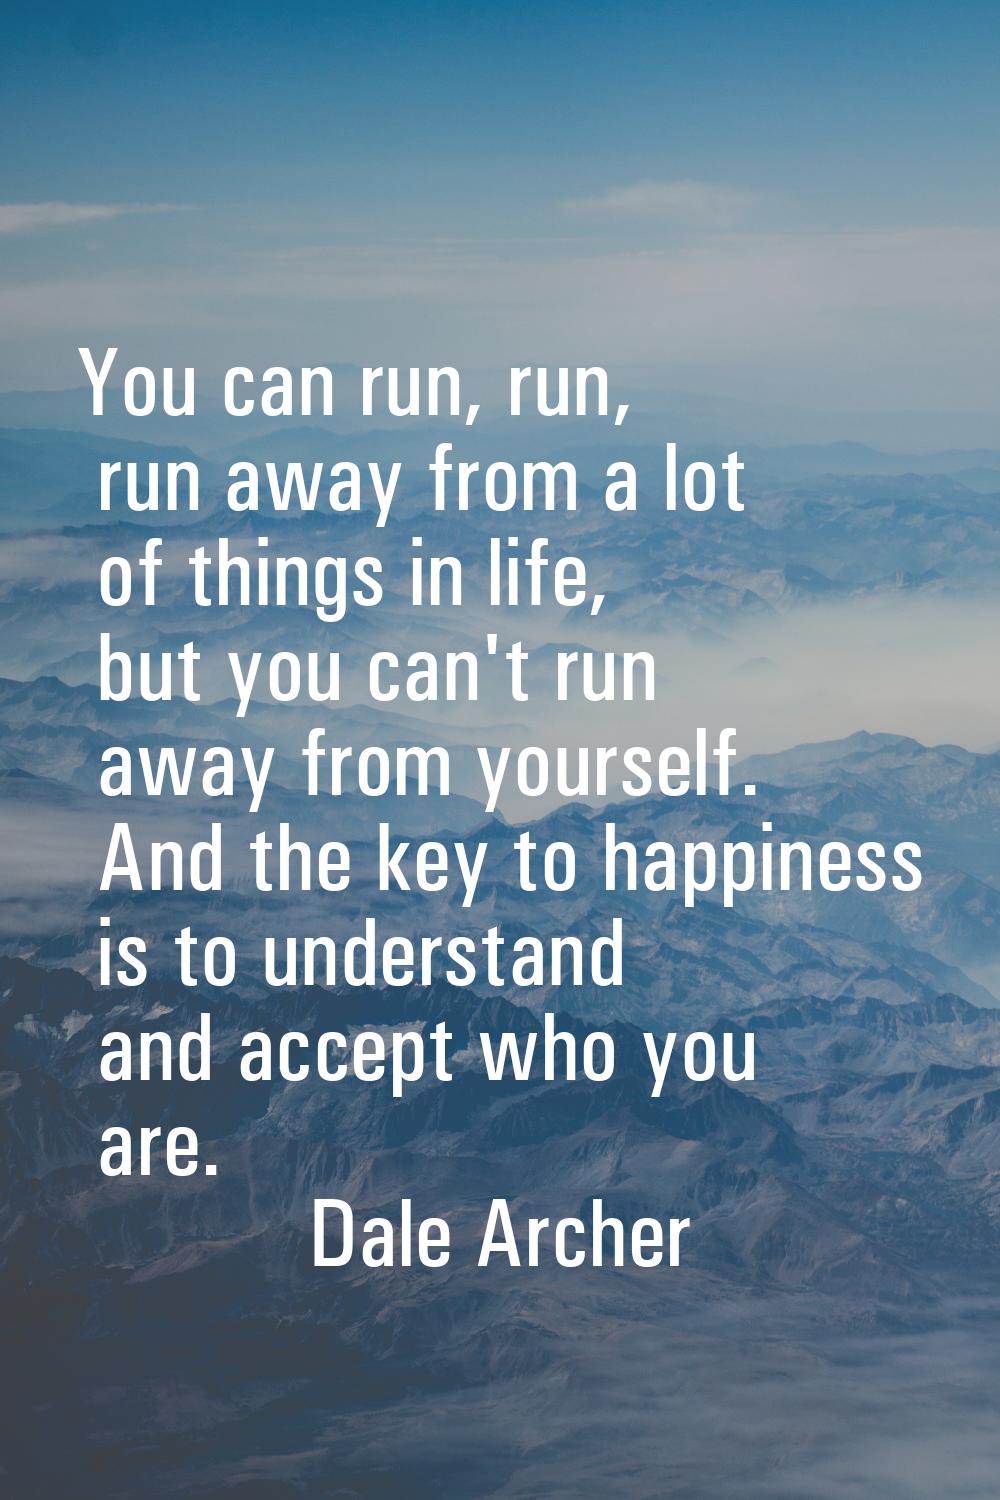 You can run, run, run away from a lot of things in life, but you can't run away from yourself. And 